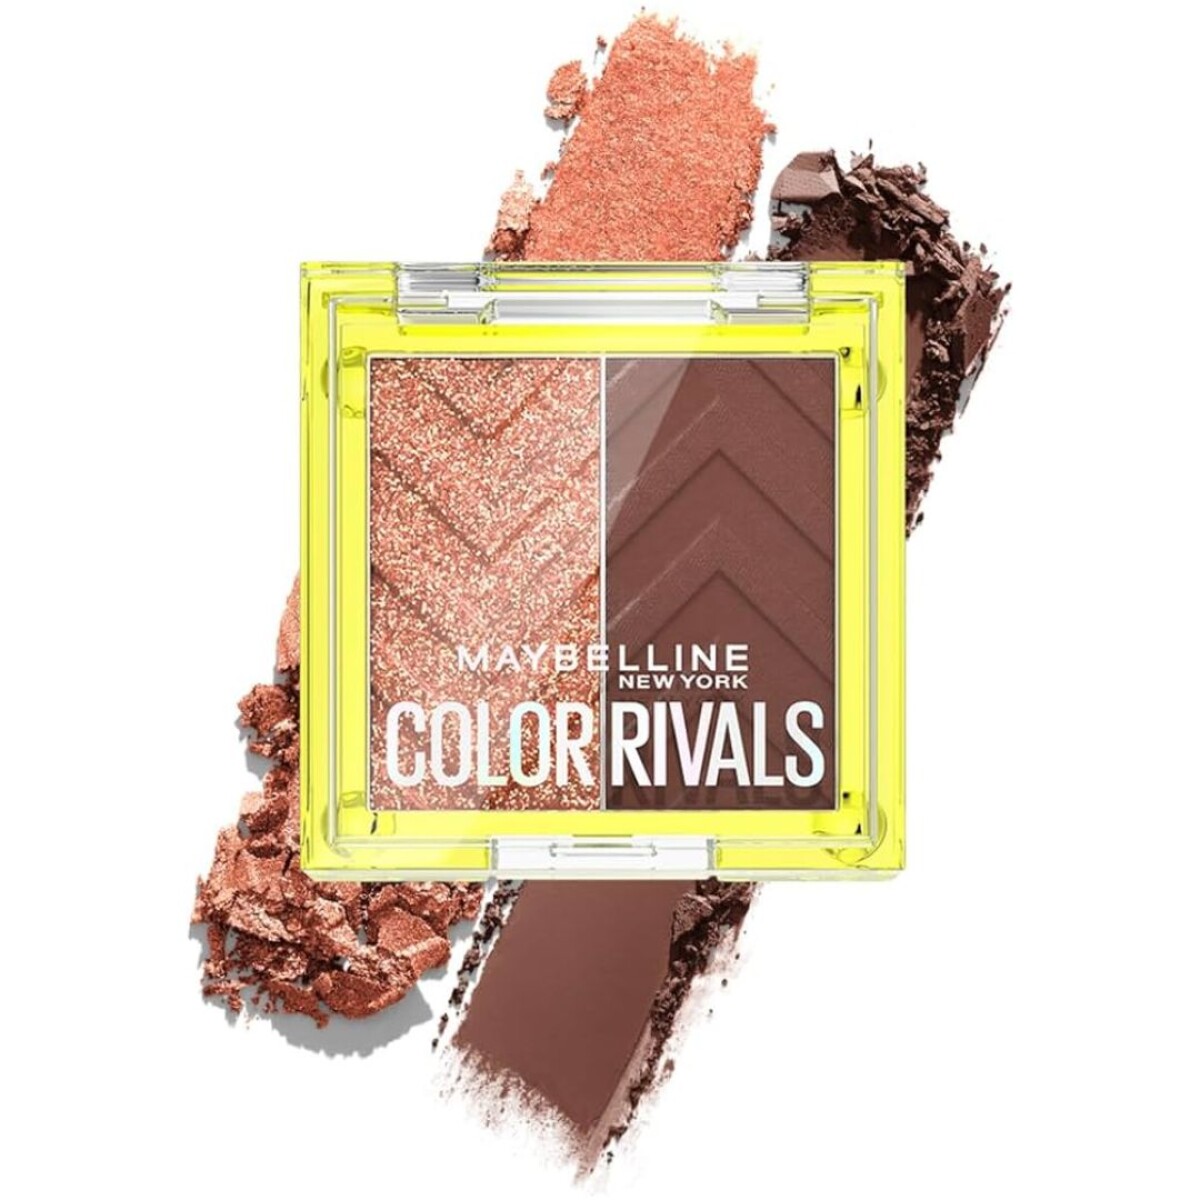 Sombra Color Rivals Maybelline - Spice & Suave 